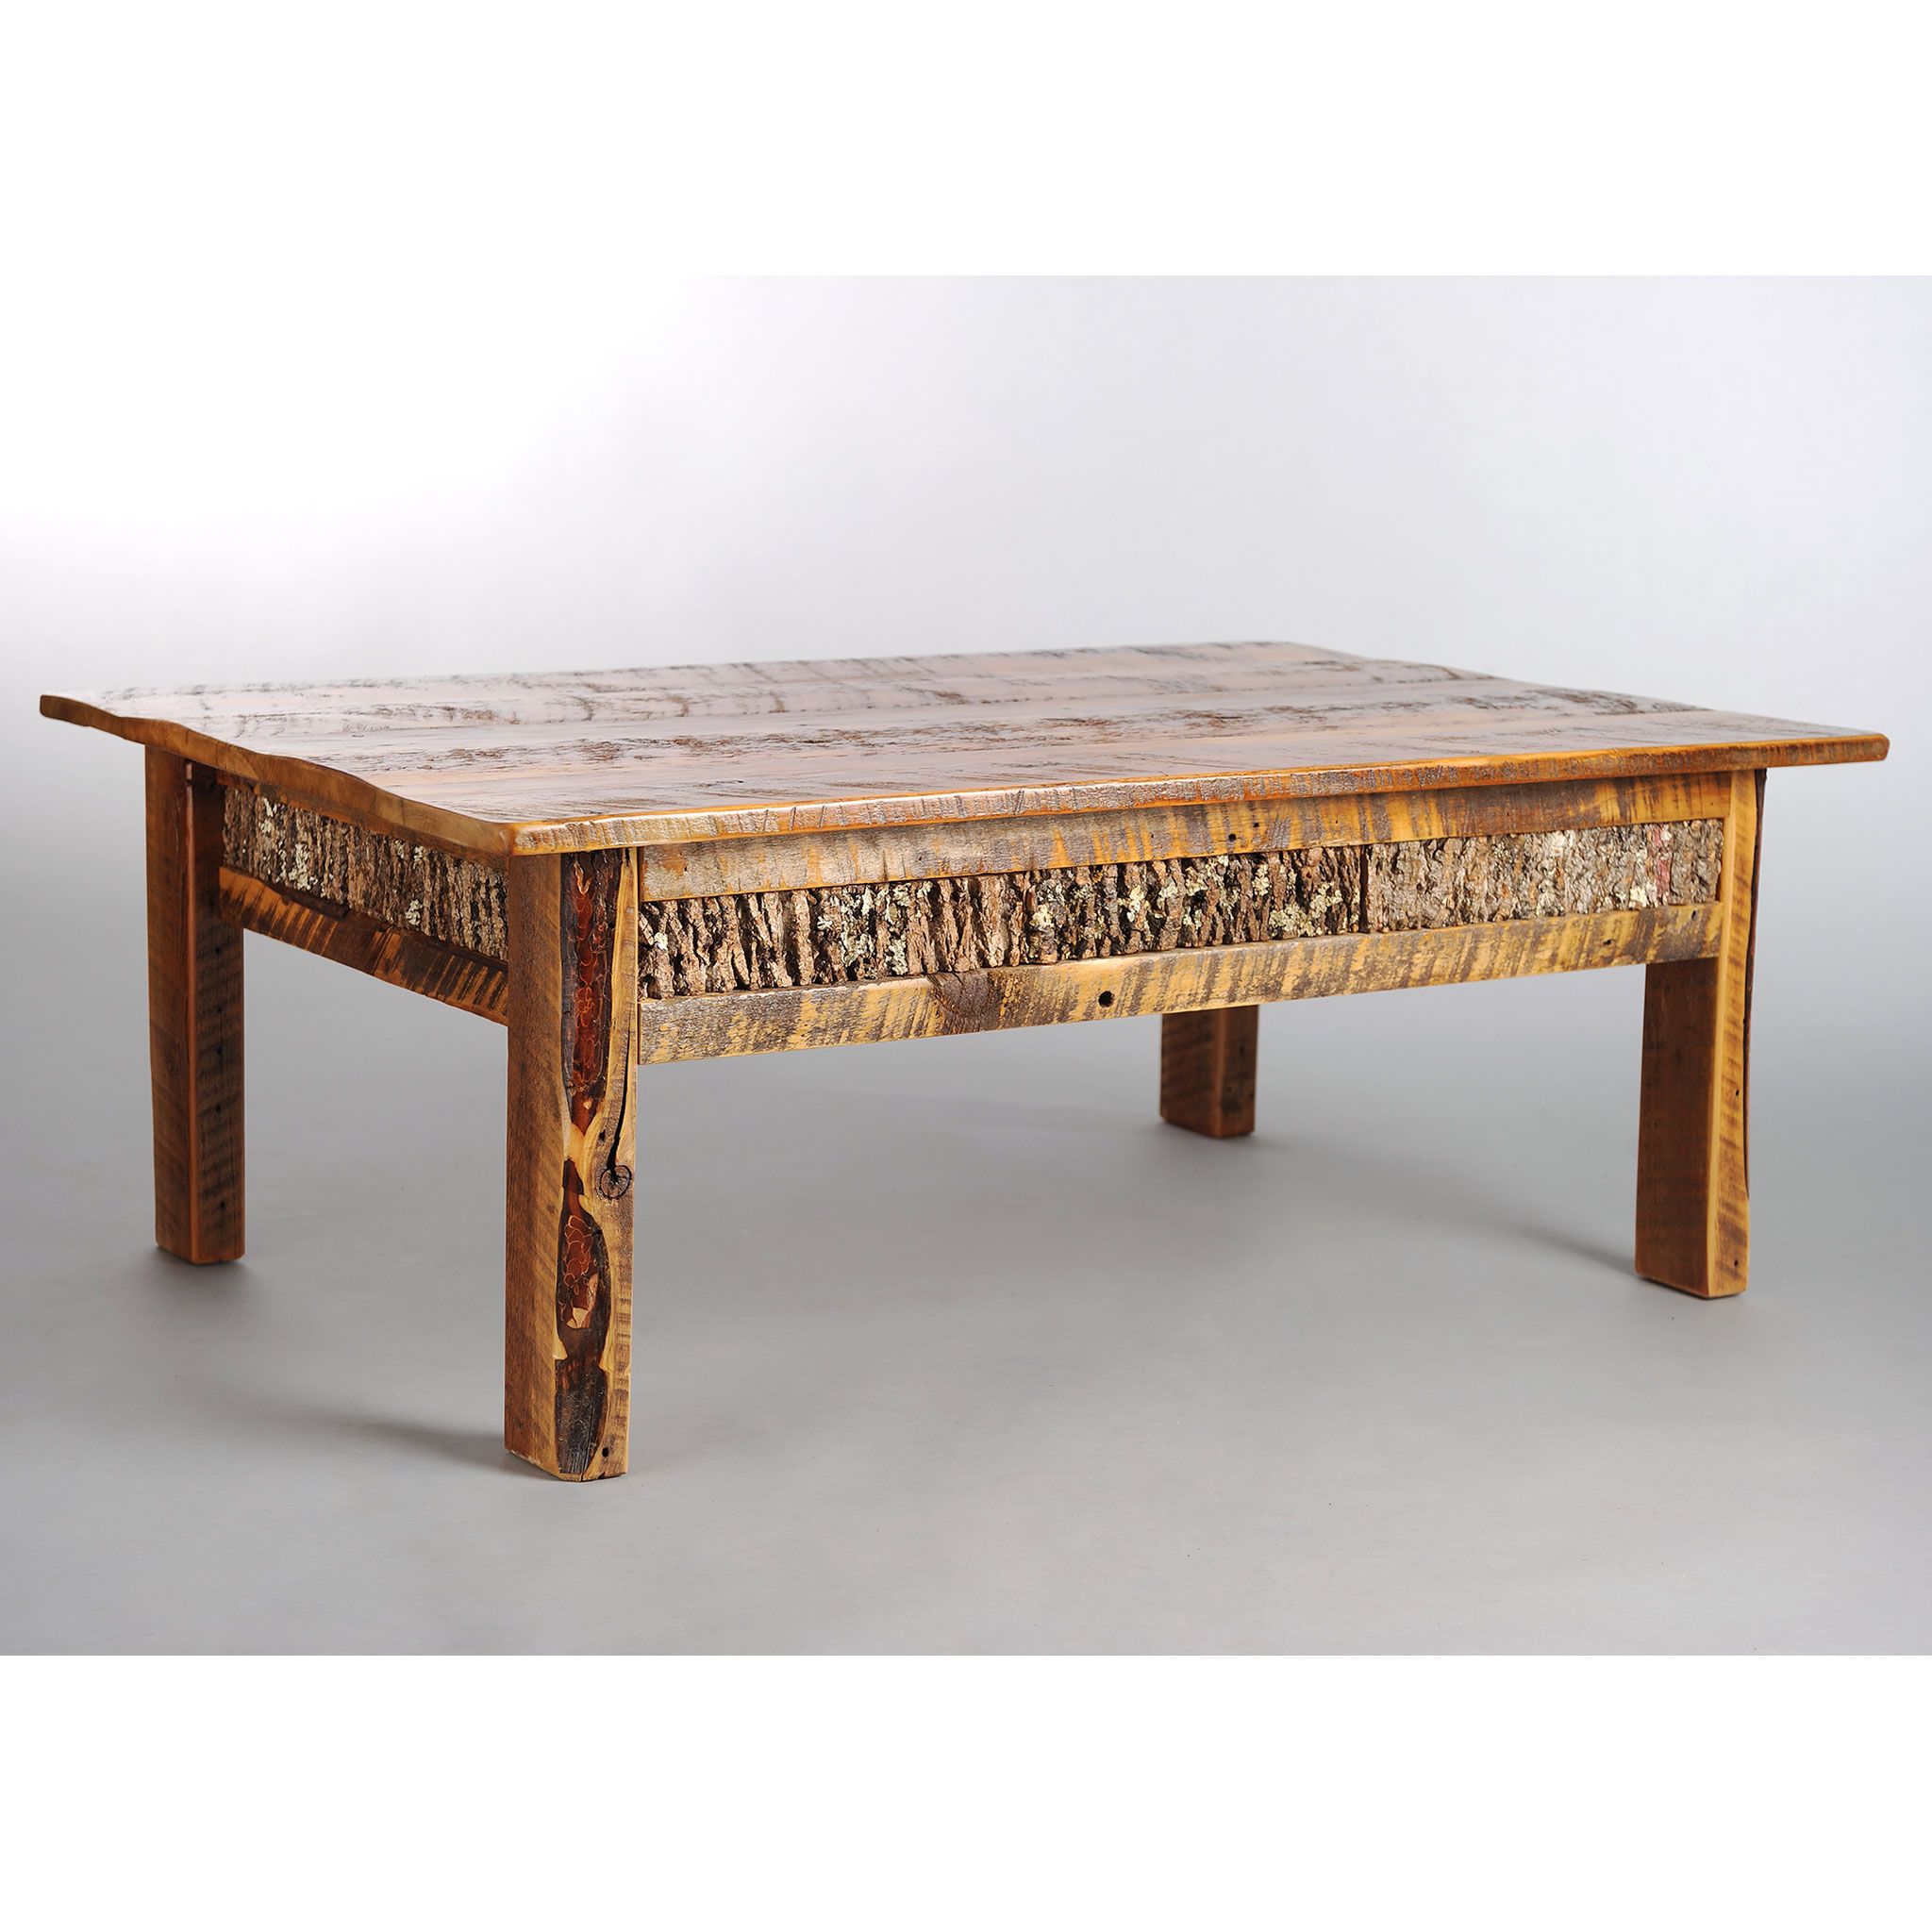 Four Corner Pertaining To Widely Used Barnwood Coffee Tables (View 8 of 20)